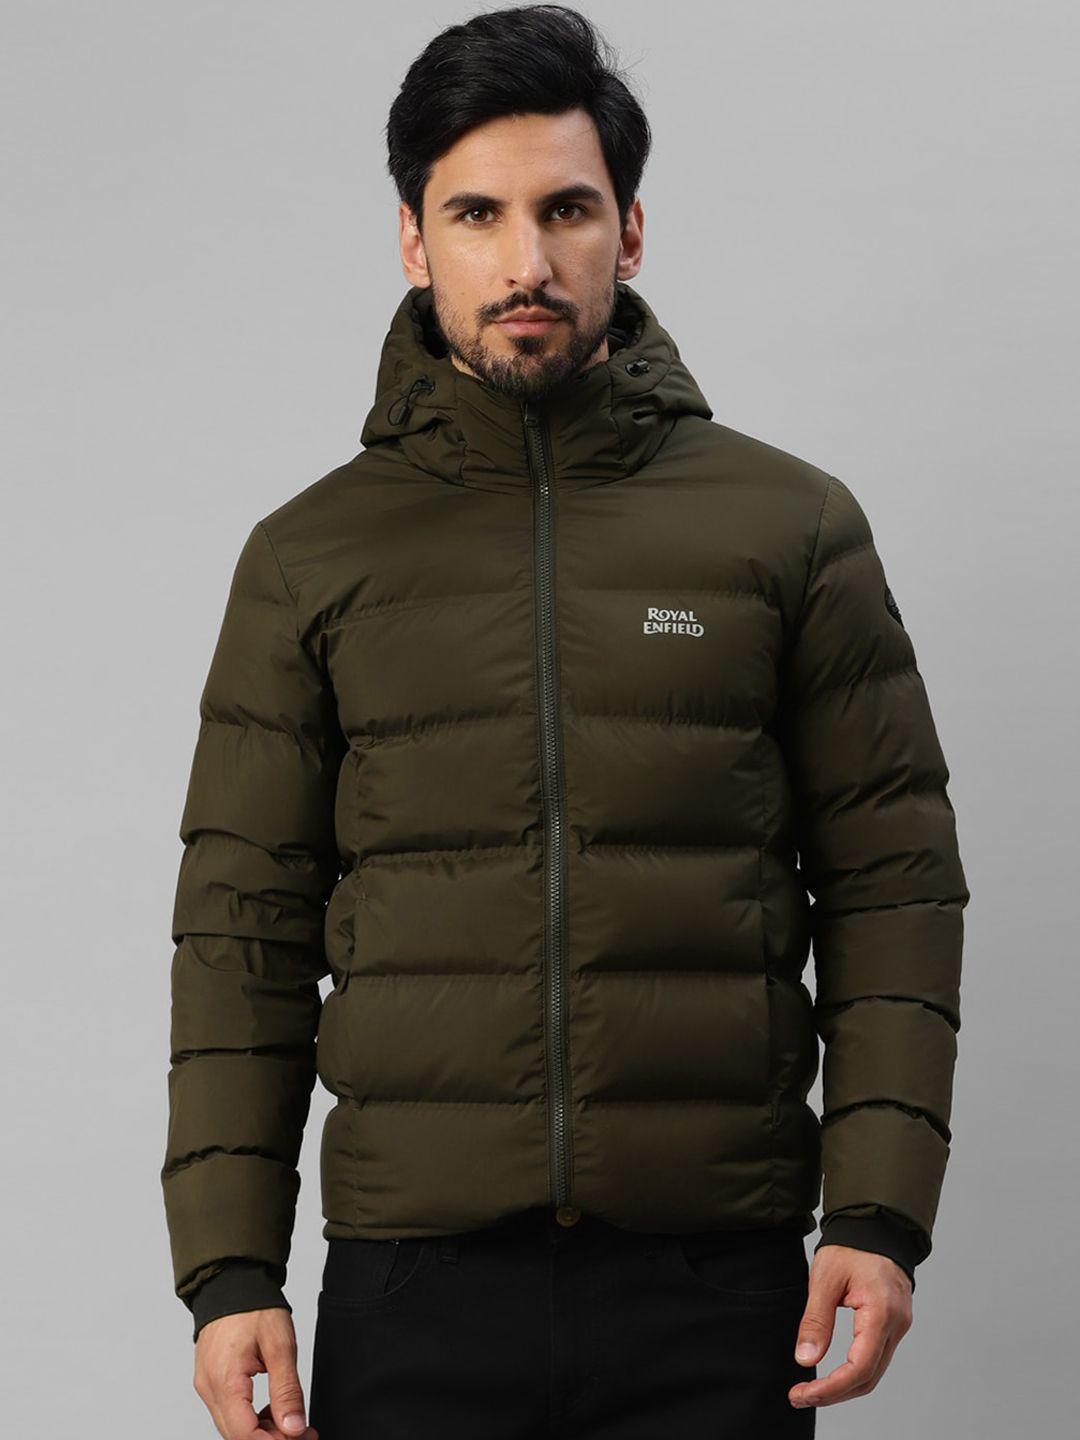 royal-enfield-hooded-quilted-jacket-with-zip-detail